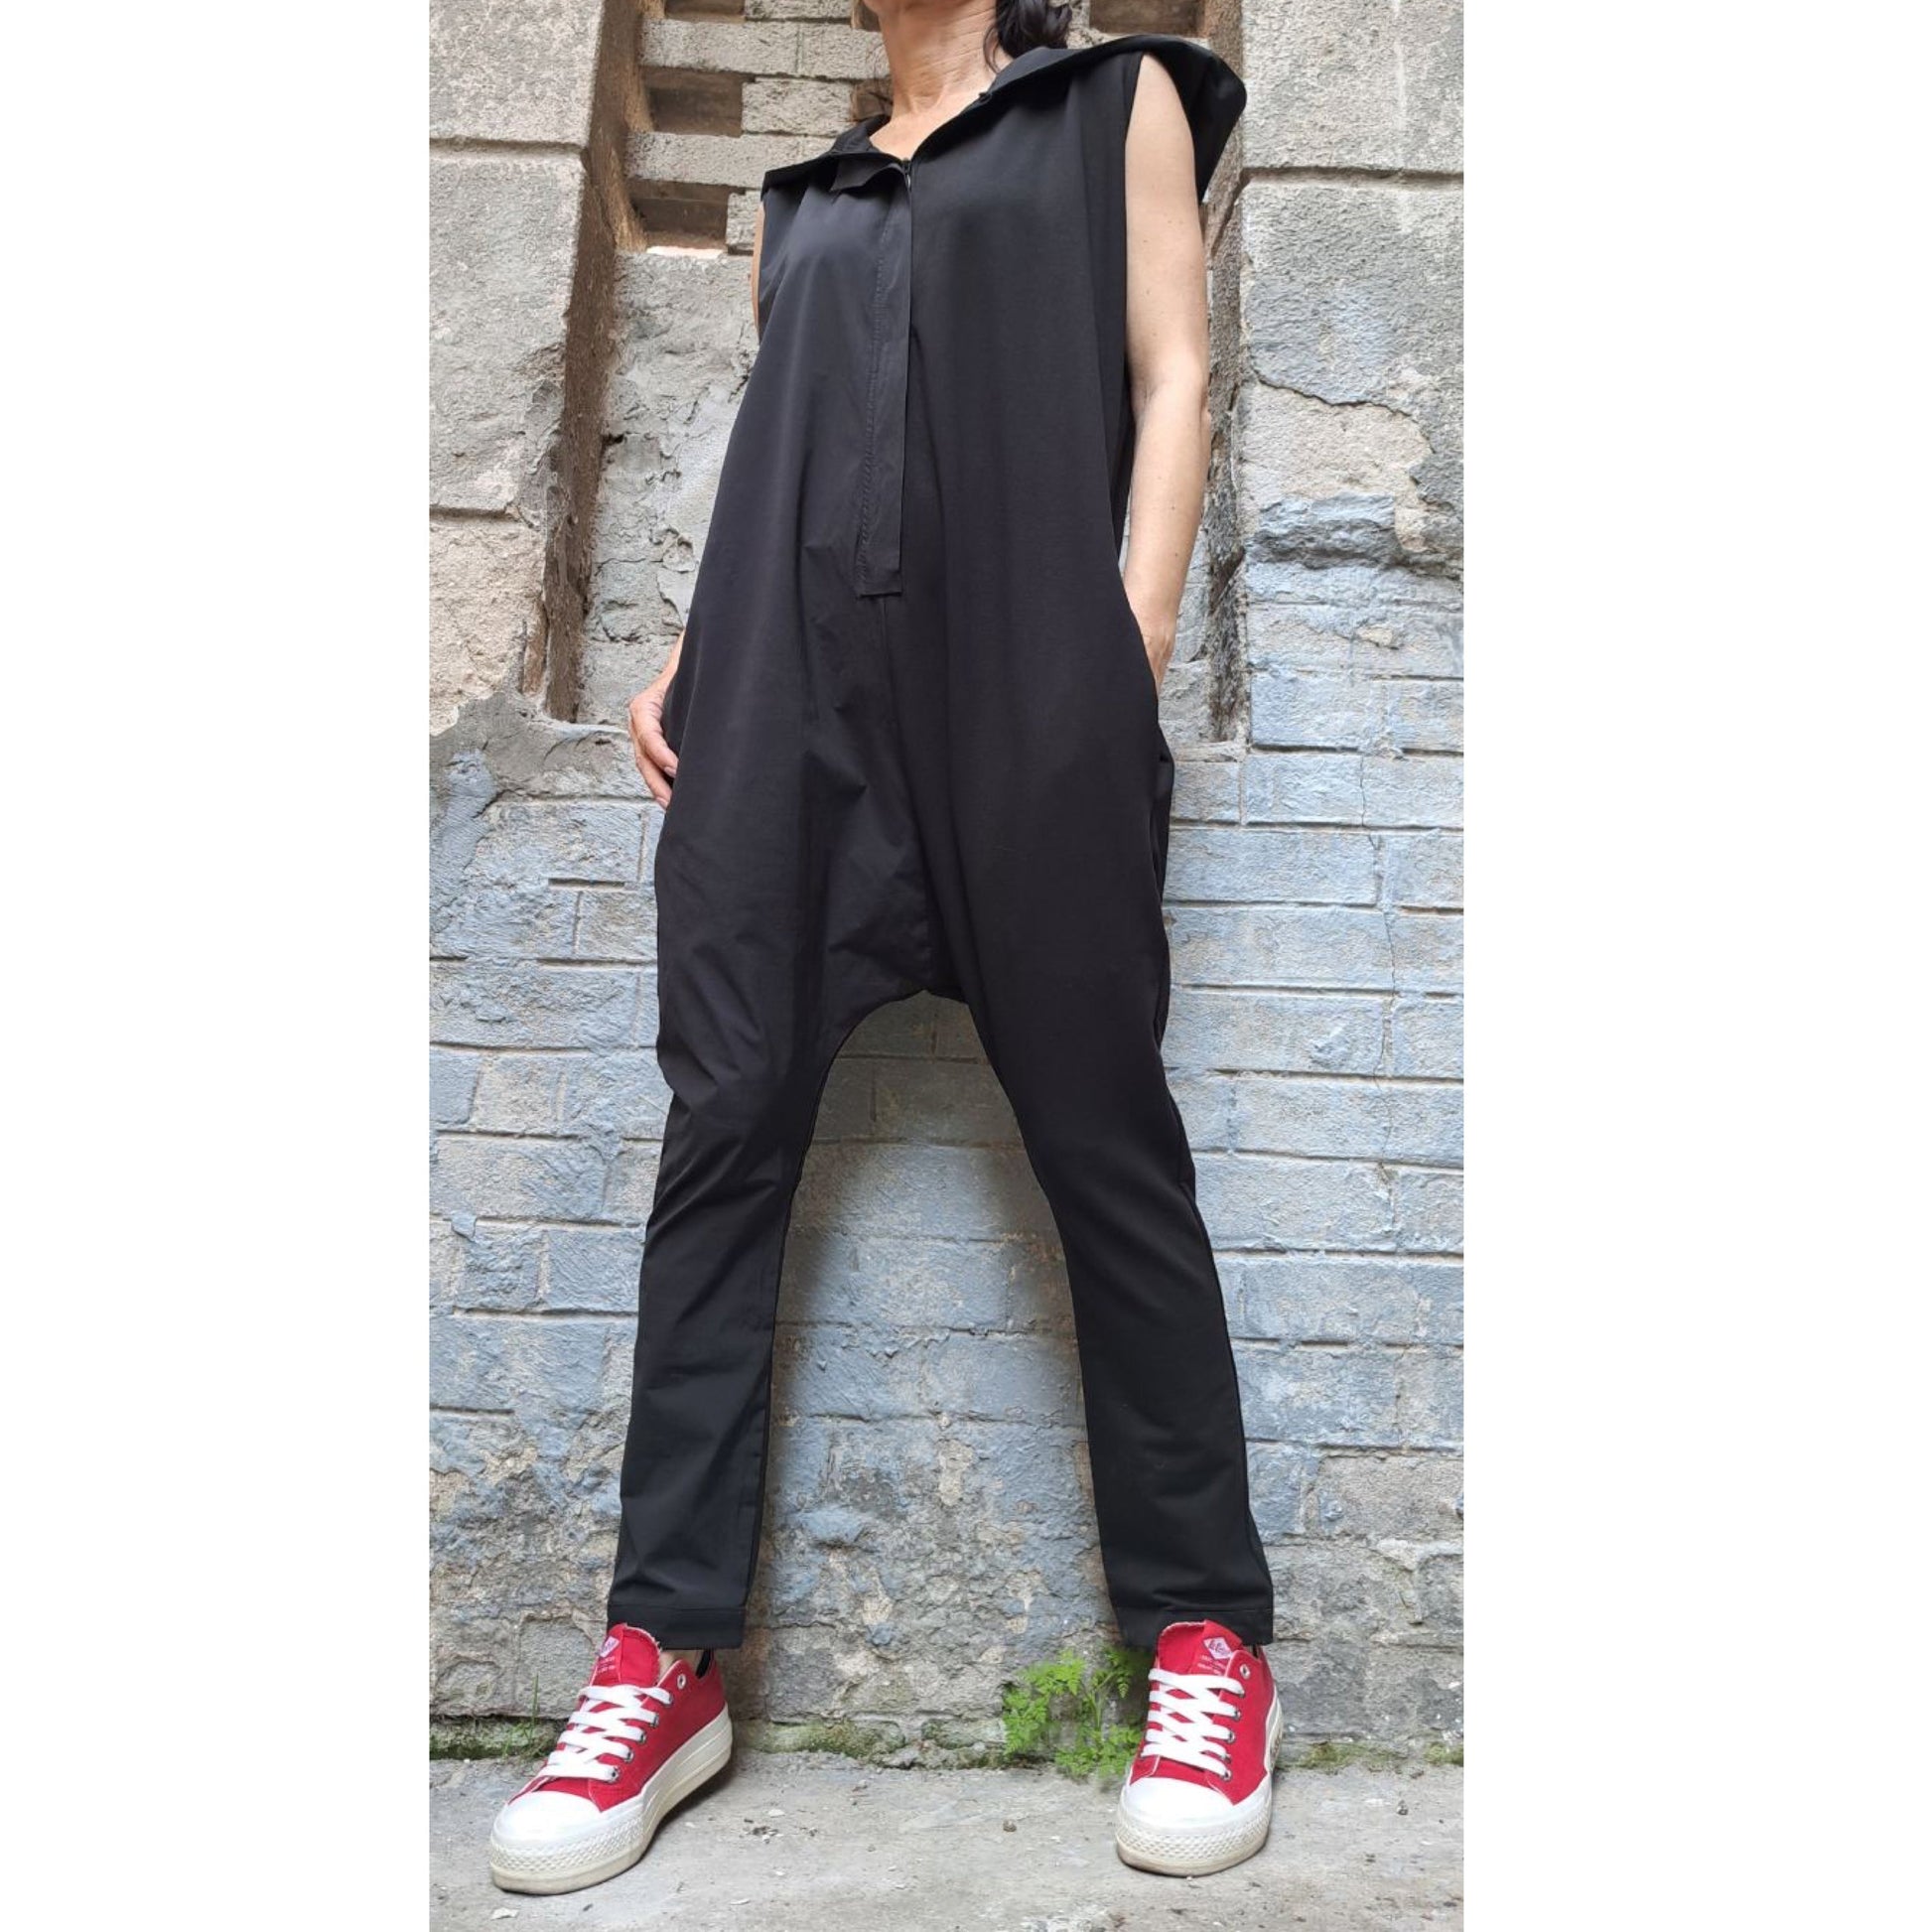 New Extravagant Harem Overalls - Handmade clothing from Angel By Silvia - Top Designer Brands 